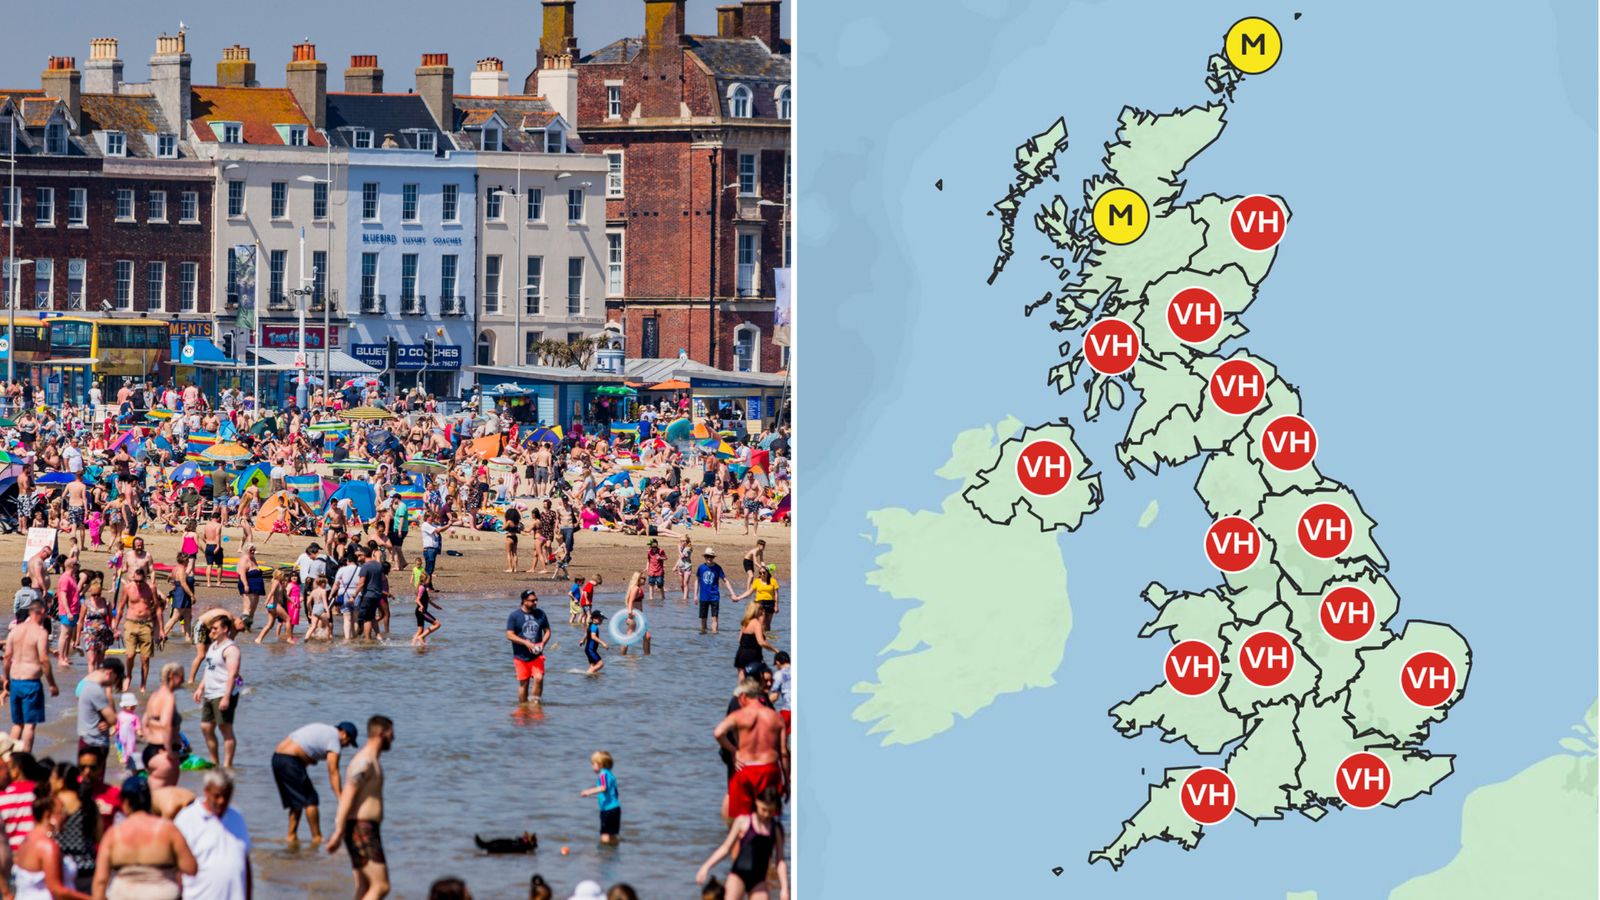 UK weather: Heatwave could hit next week - but there's a big catch for hayfever sufferers thanks to 'pollen bomb'